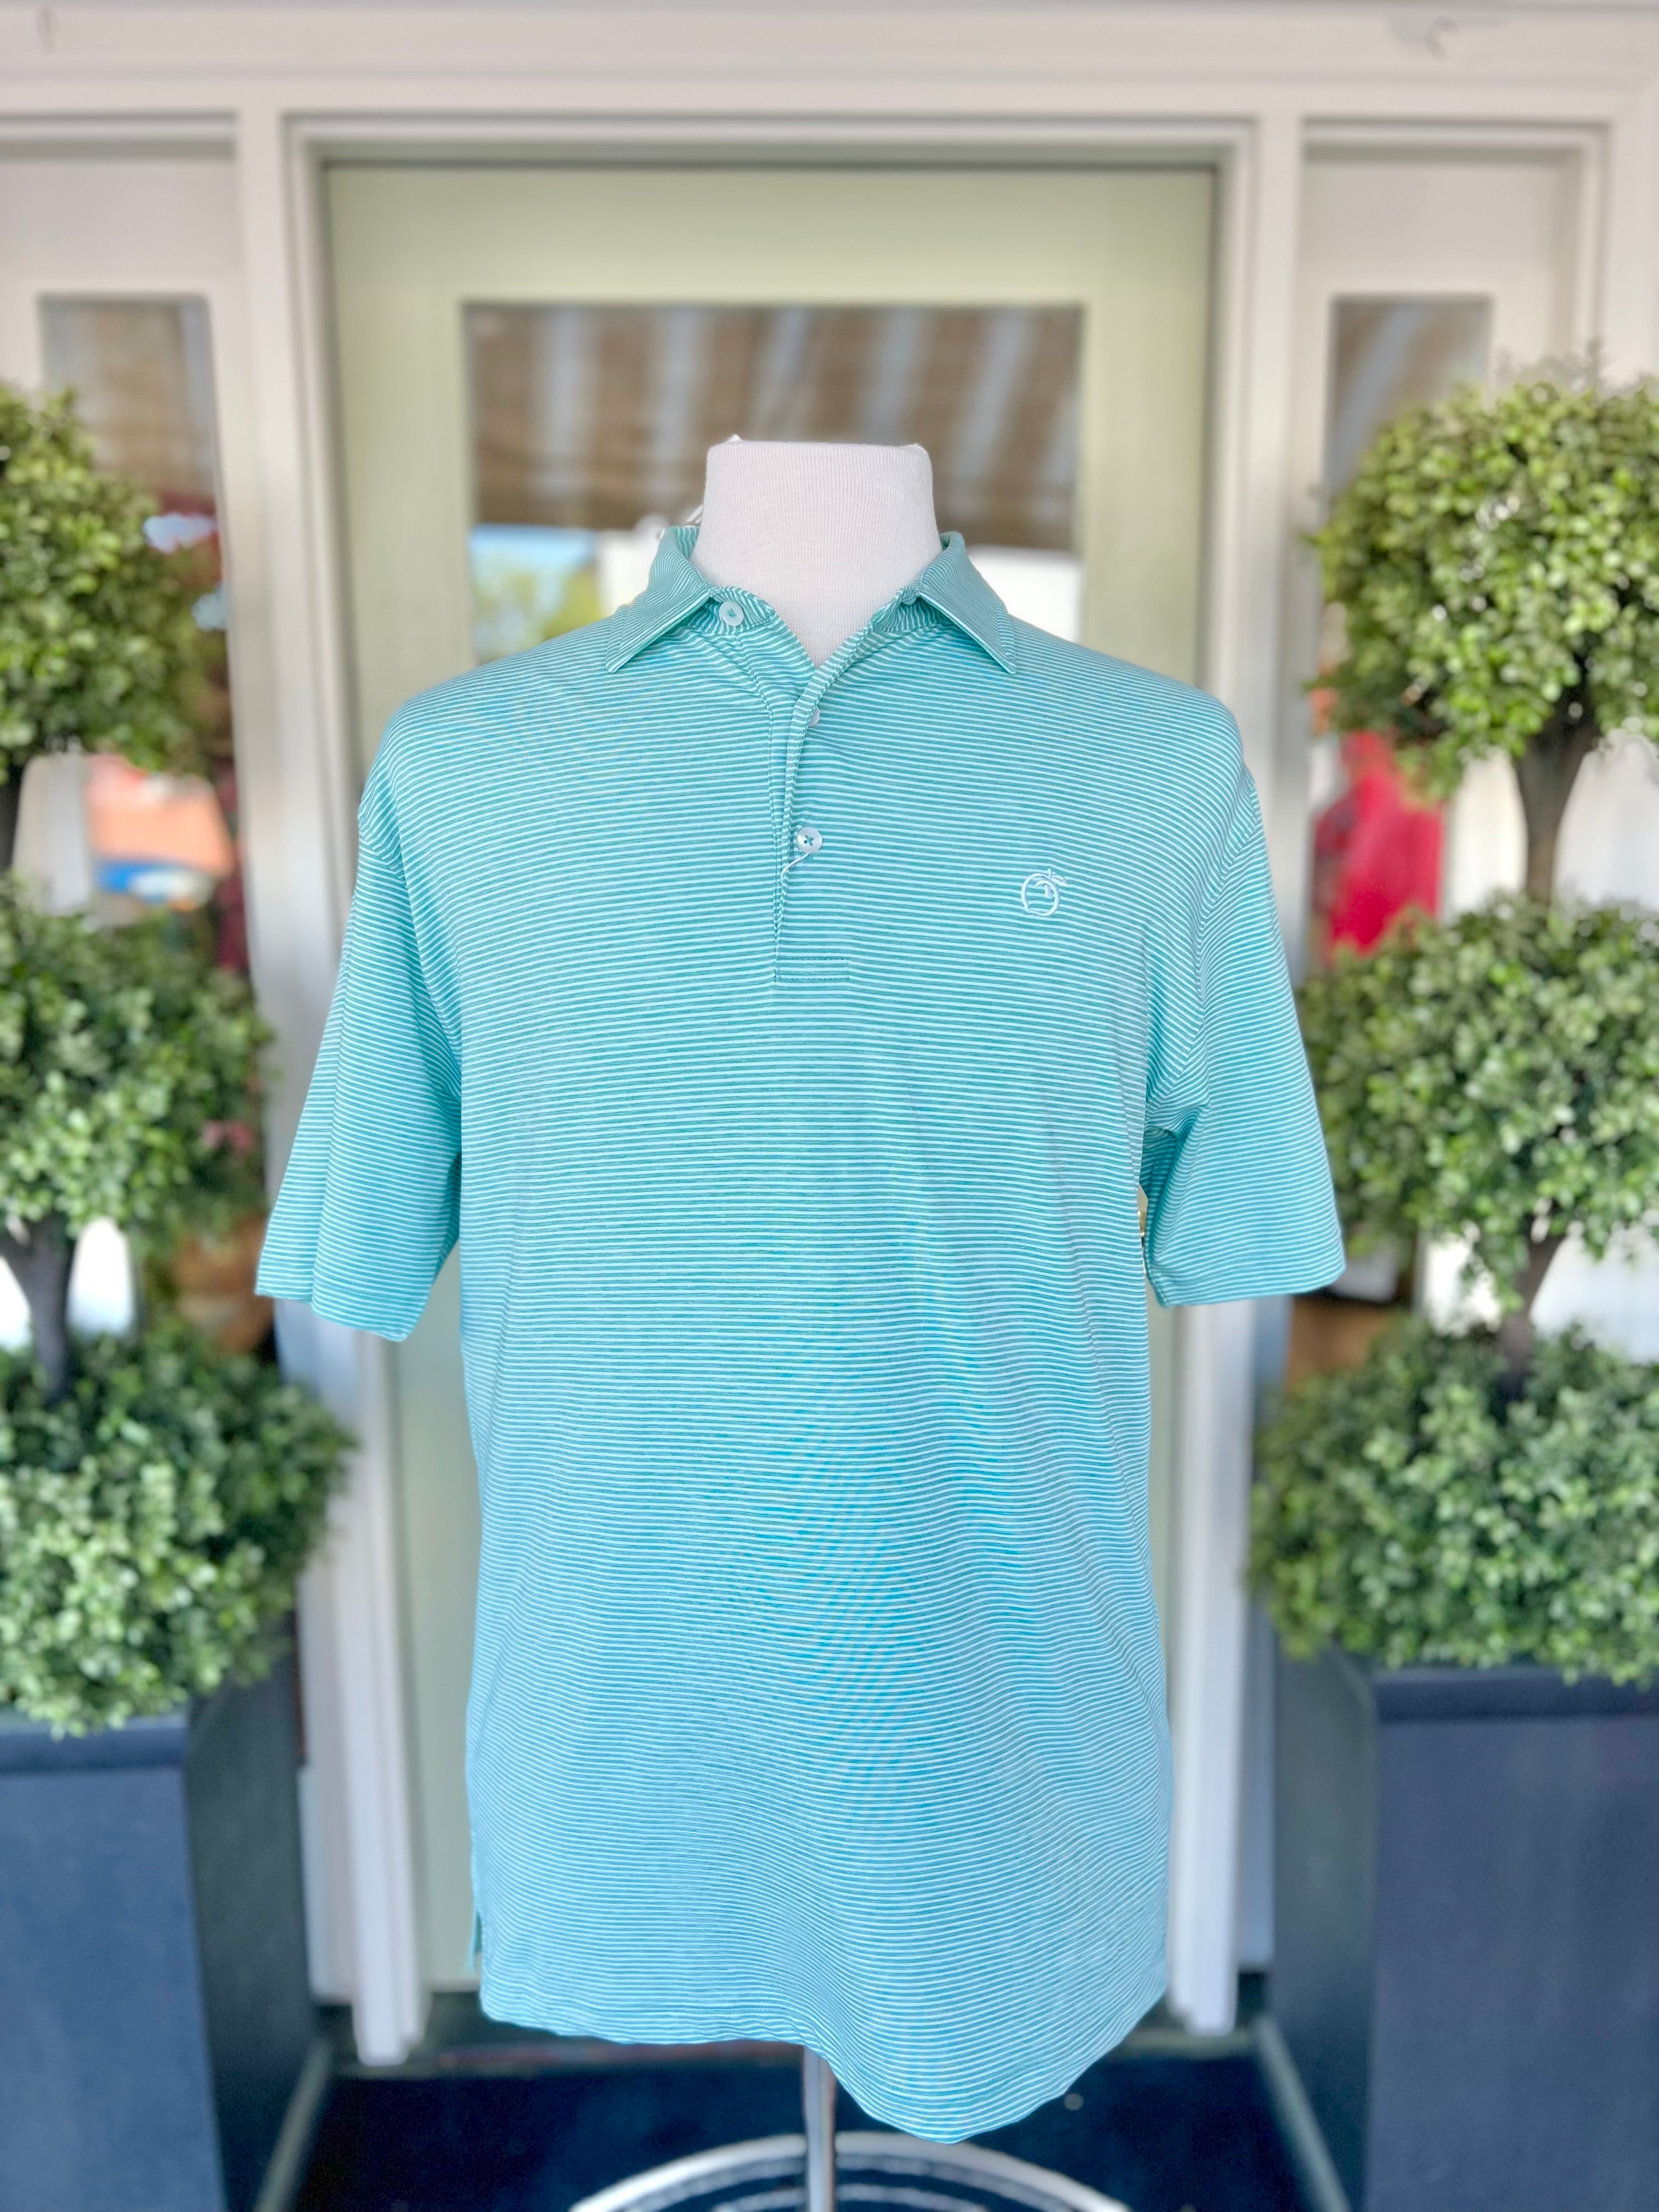 Heathered Azalea Performance Polo in Pine Green & Cays Blue by Peach State Pride